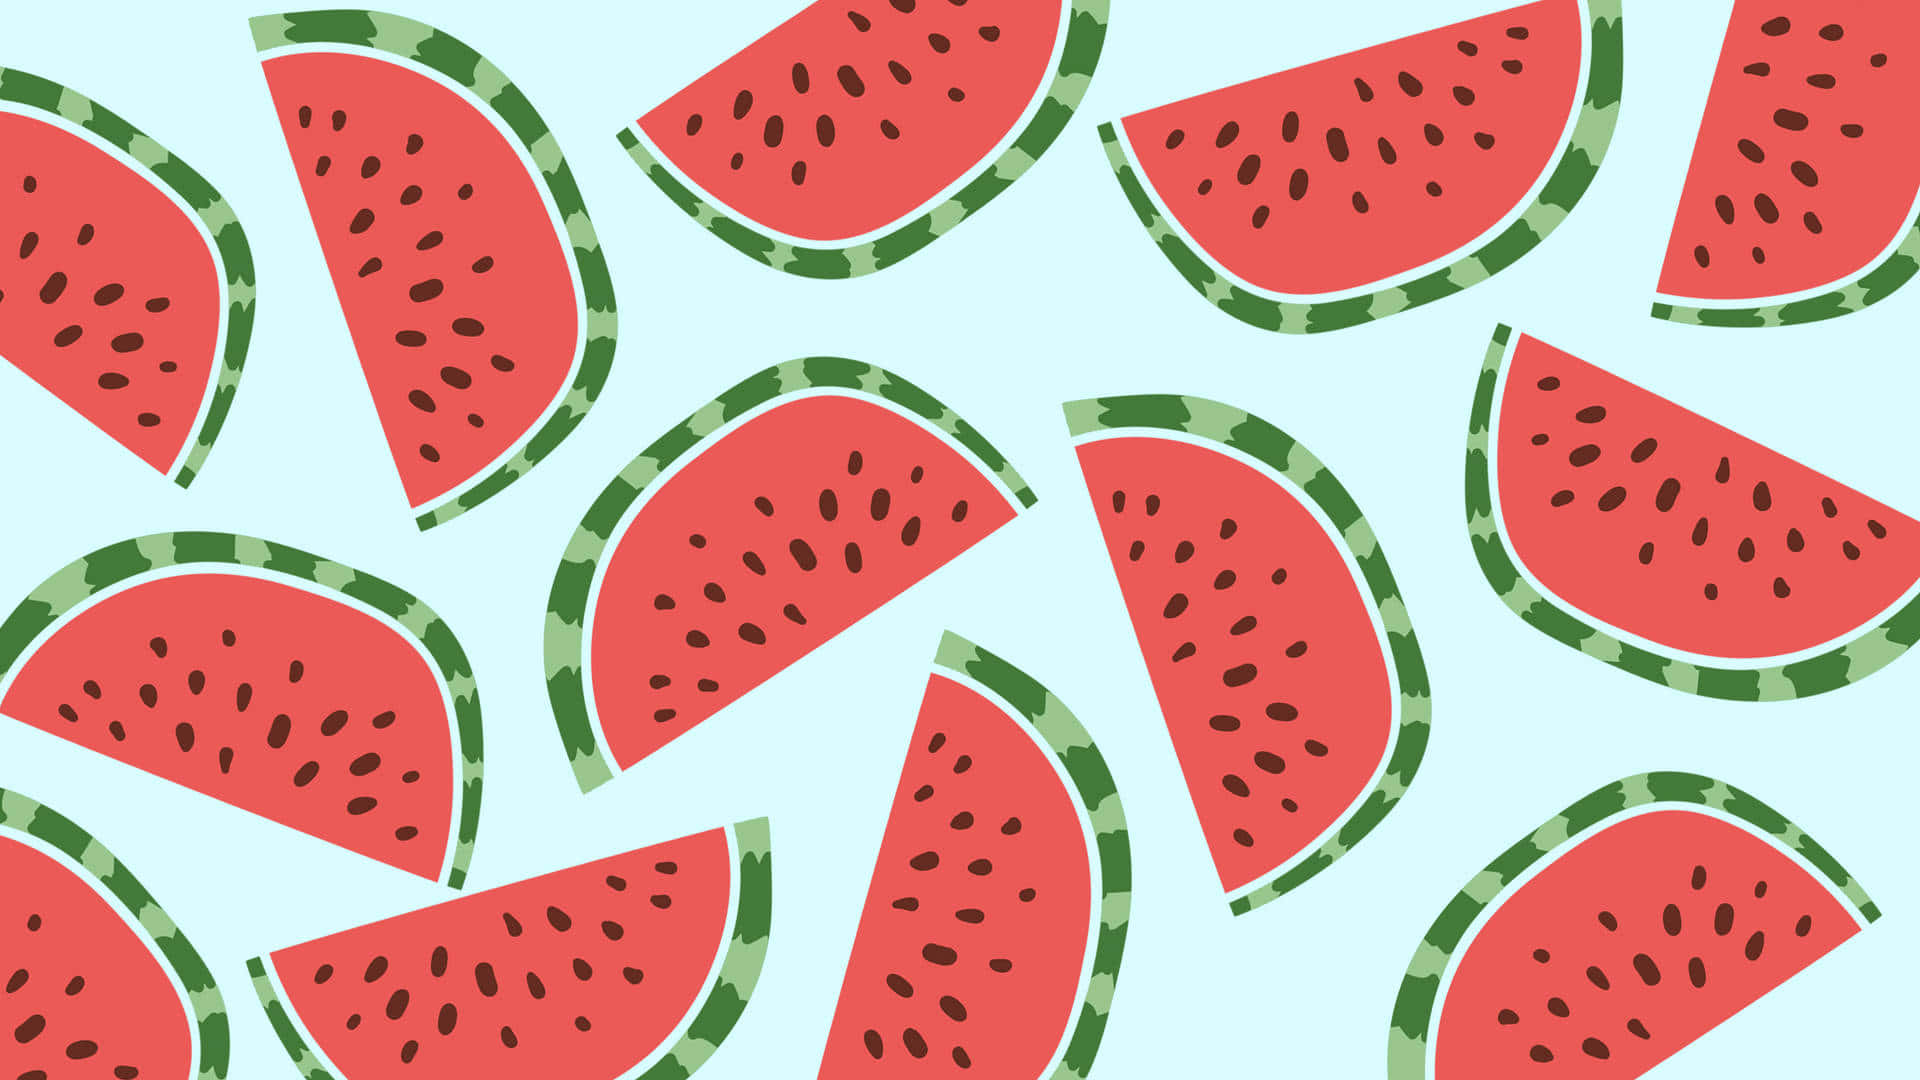 Artistic Several Sliced Watermelons Background